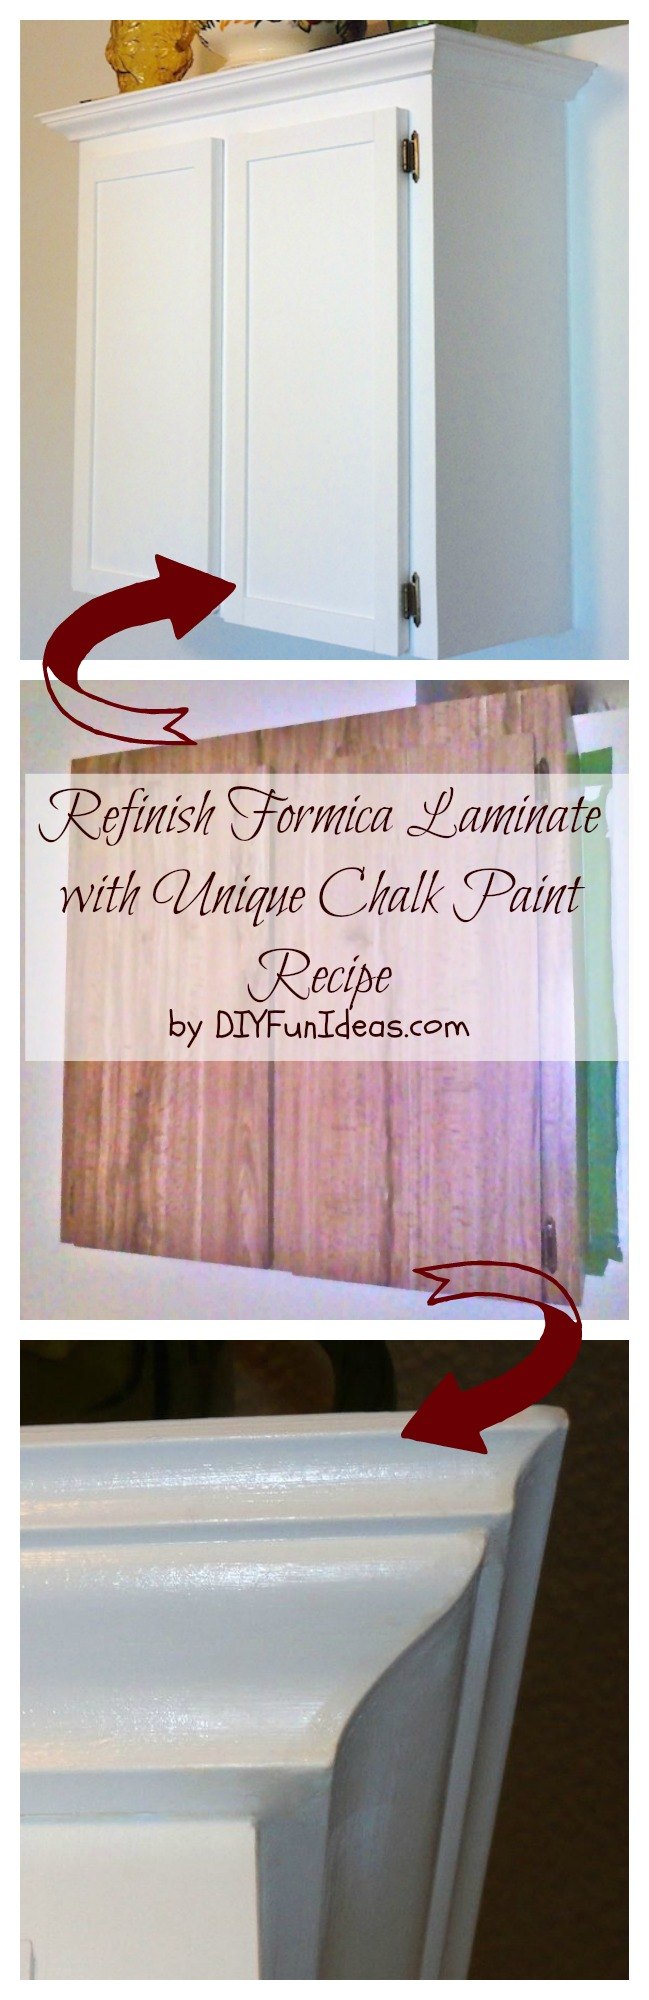 how to refinish formica with chalk paint